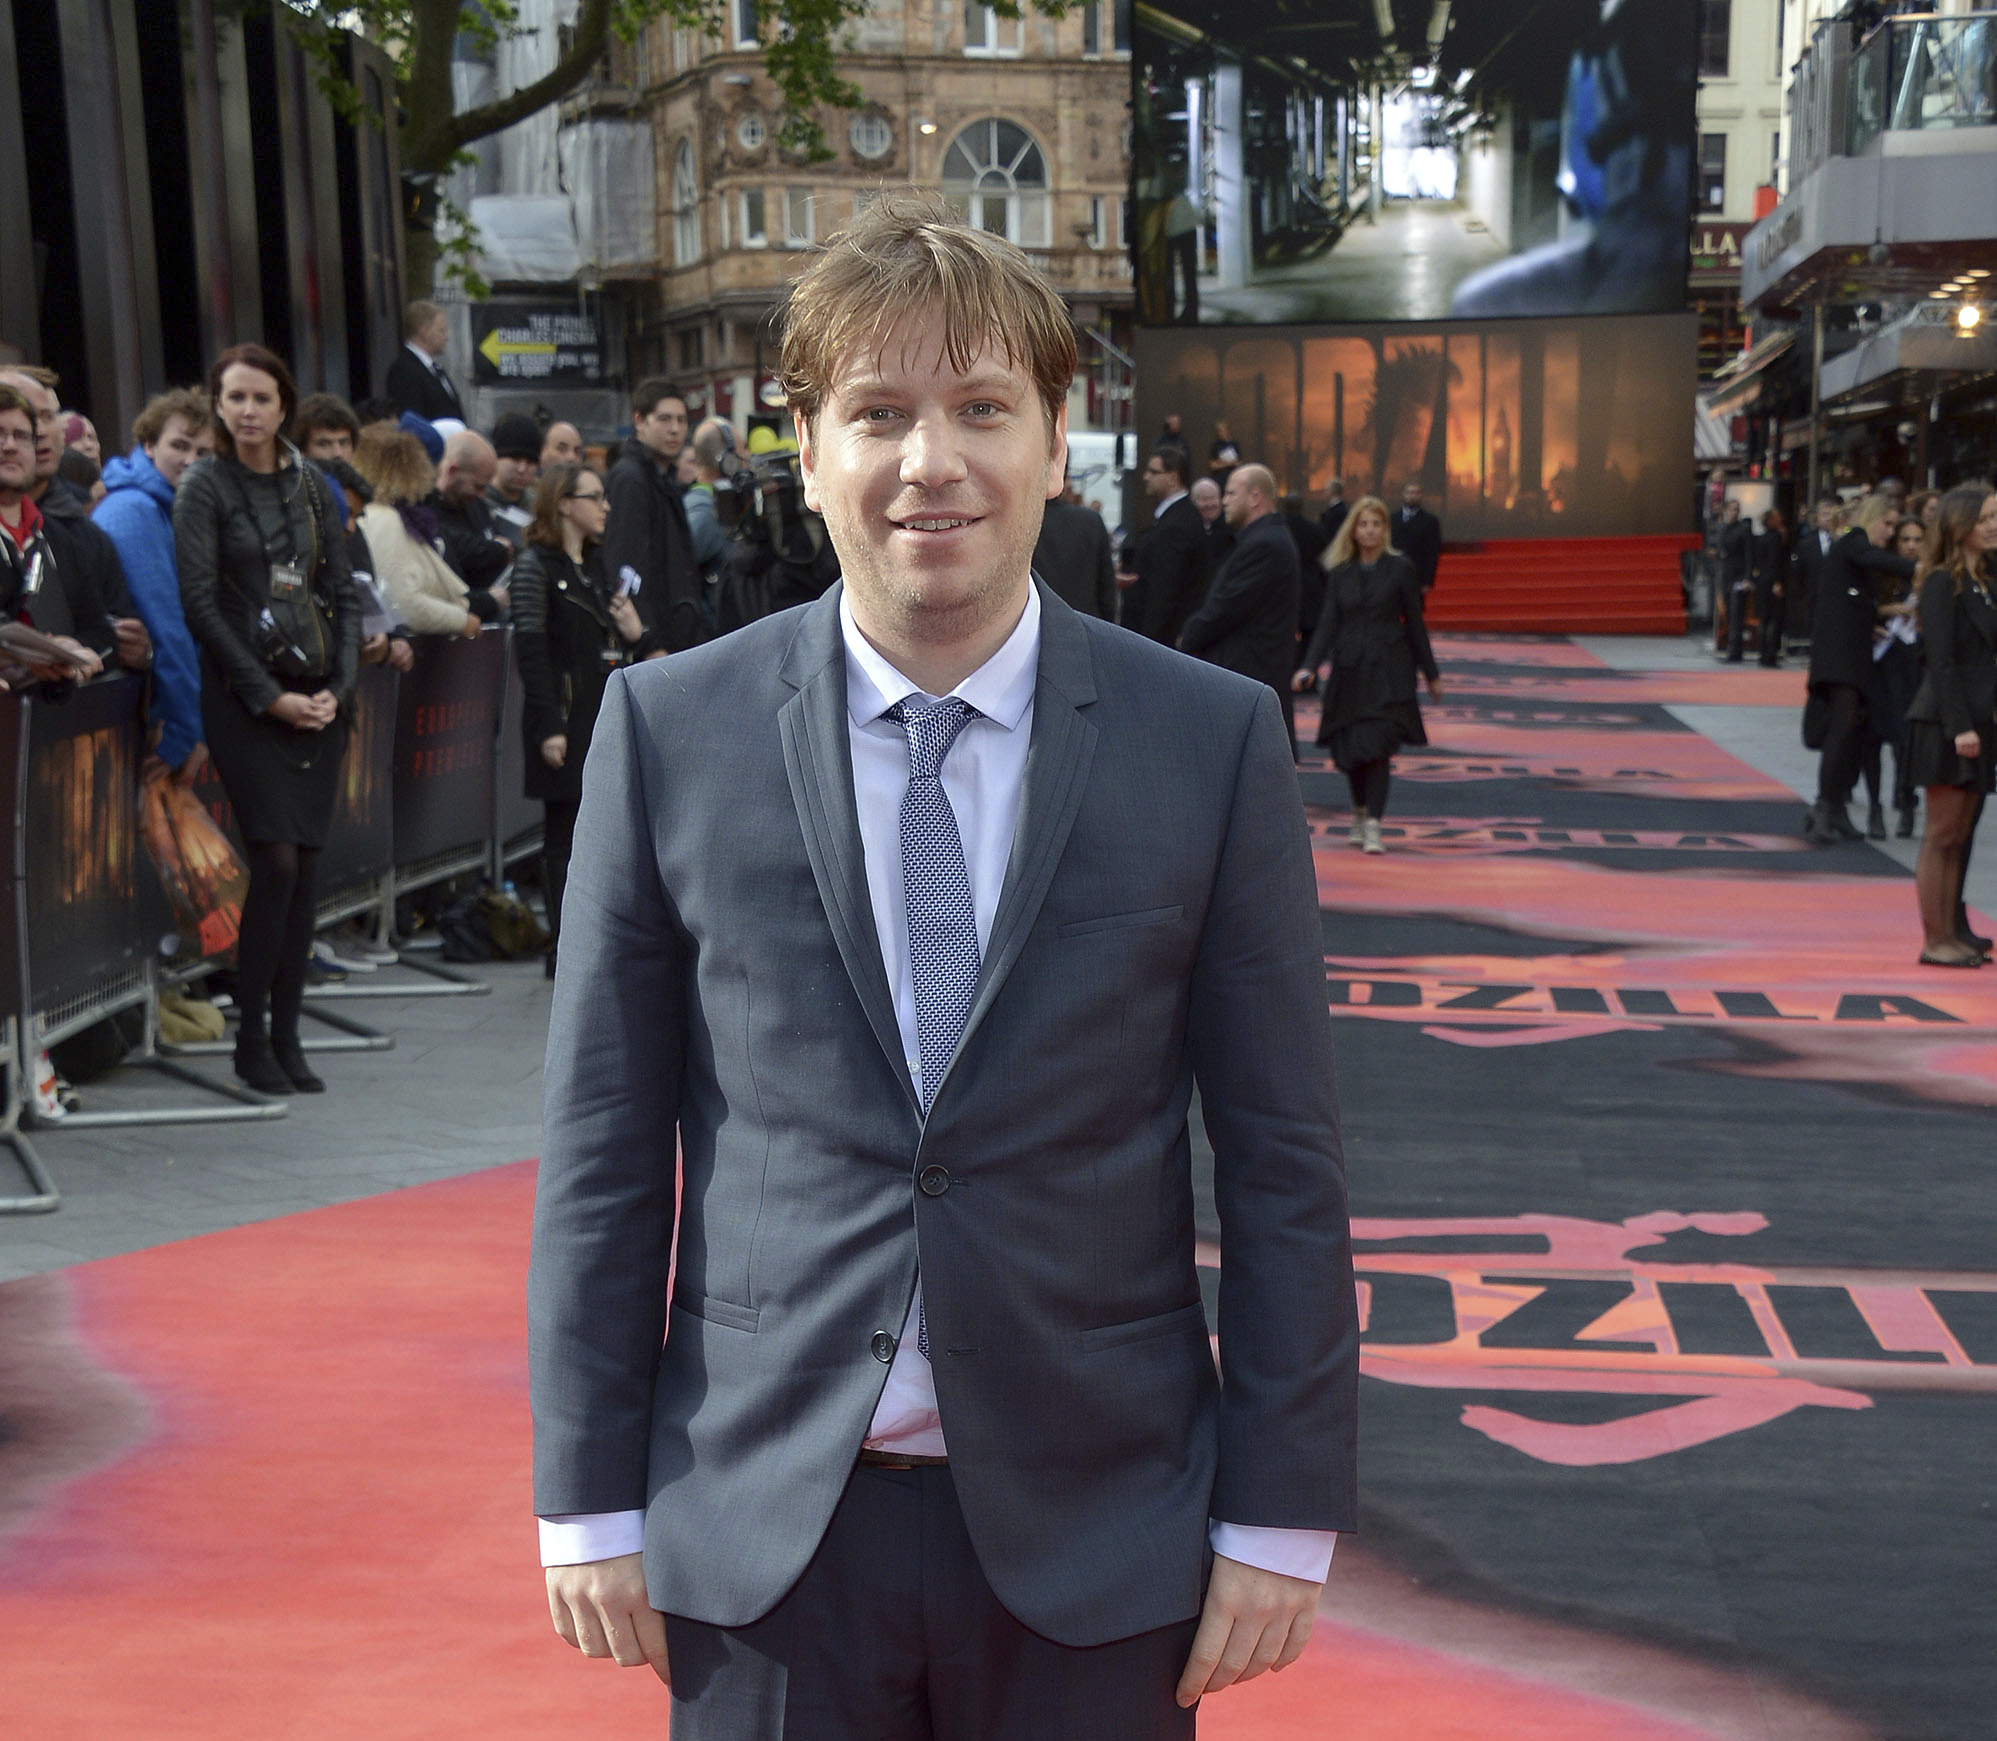 FILE - In this May 11, 2014 file photo, director Gareth Edwards poses for photographers on the red carpet for the UK premiere of Godzilla in London. Edwards says he gave himself a cameo in the "Star Wars" spinoff "Rogue One: A Star Wars Story." Arriving in theaters on Dec. 16, 2016, "Rogue One" is the first in a series of spinoffs set inside the universe of "Star Wars." (Photo by Jon Furniss/Invision/AP, File)